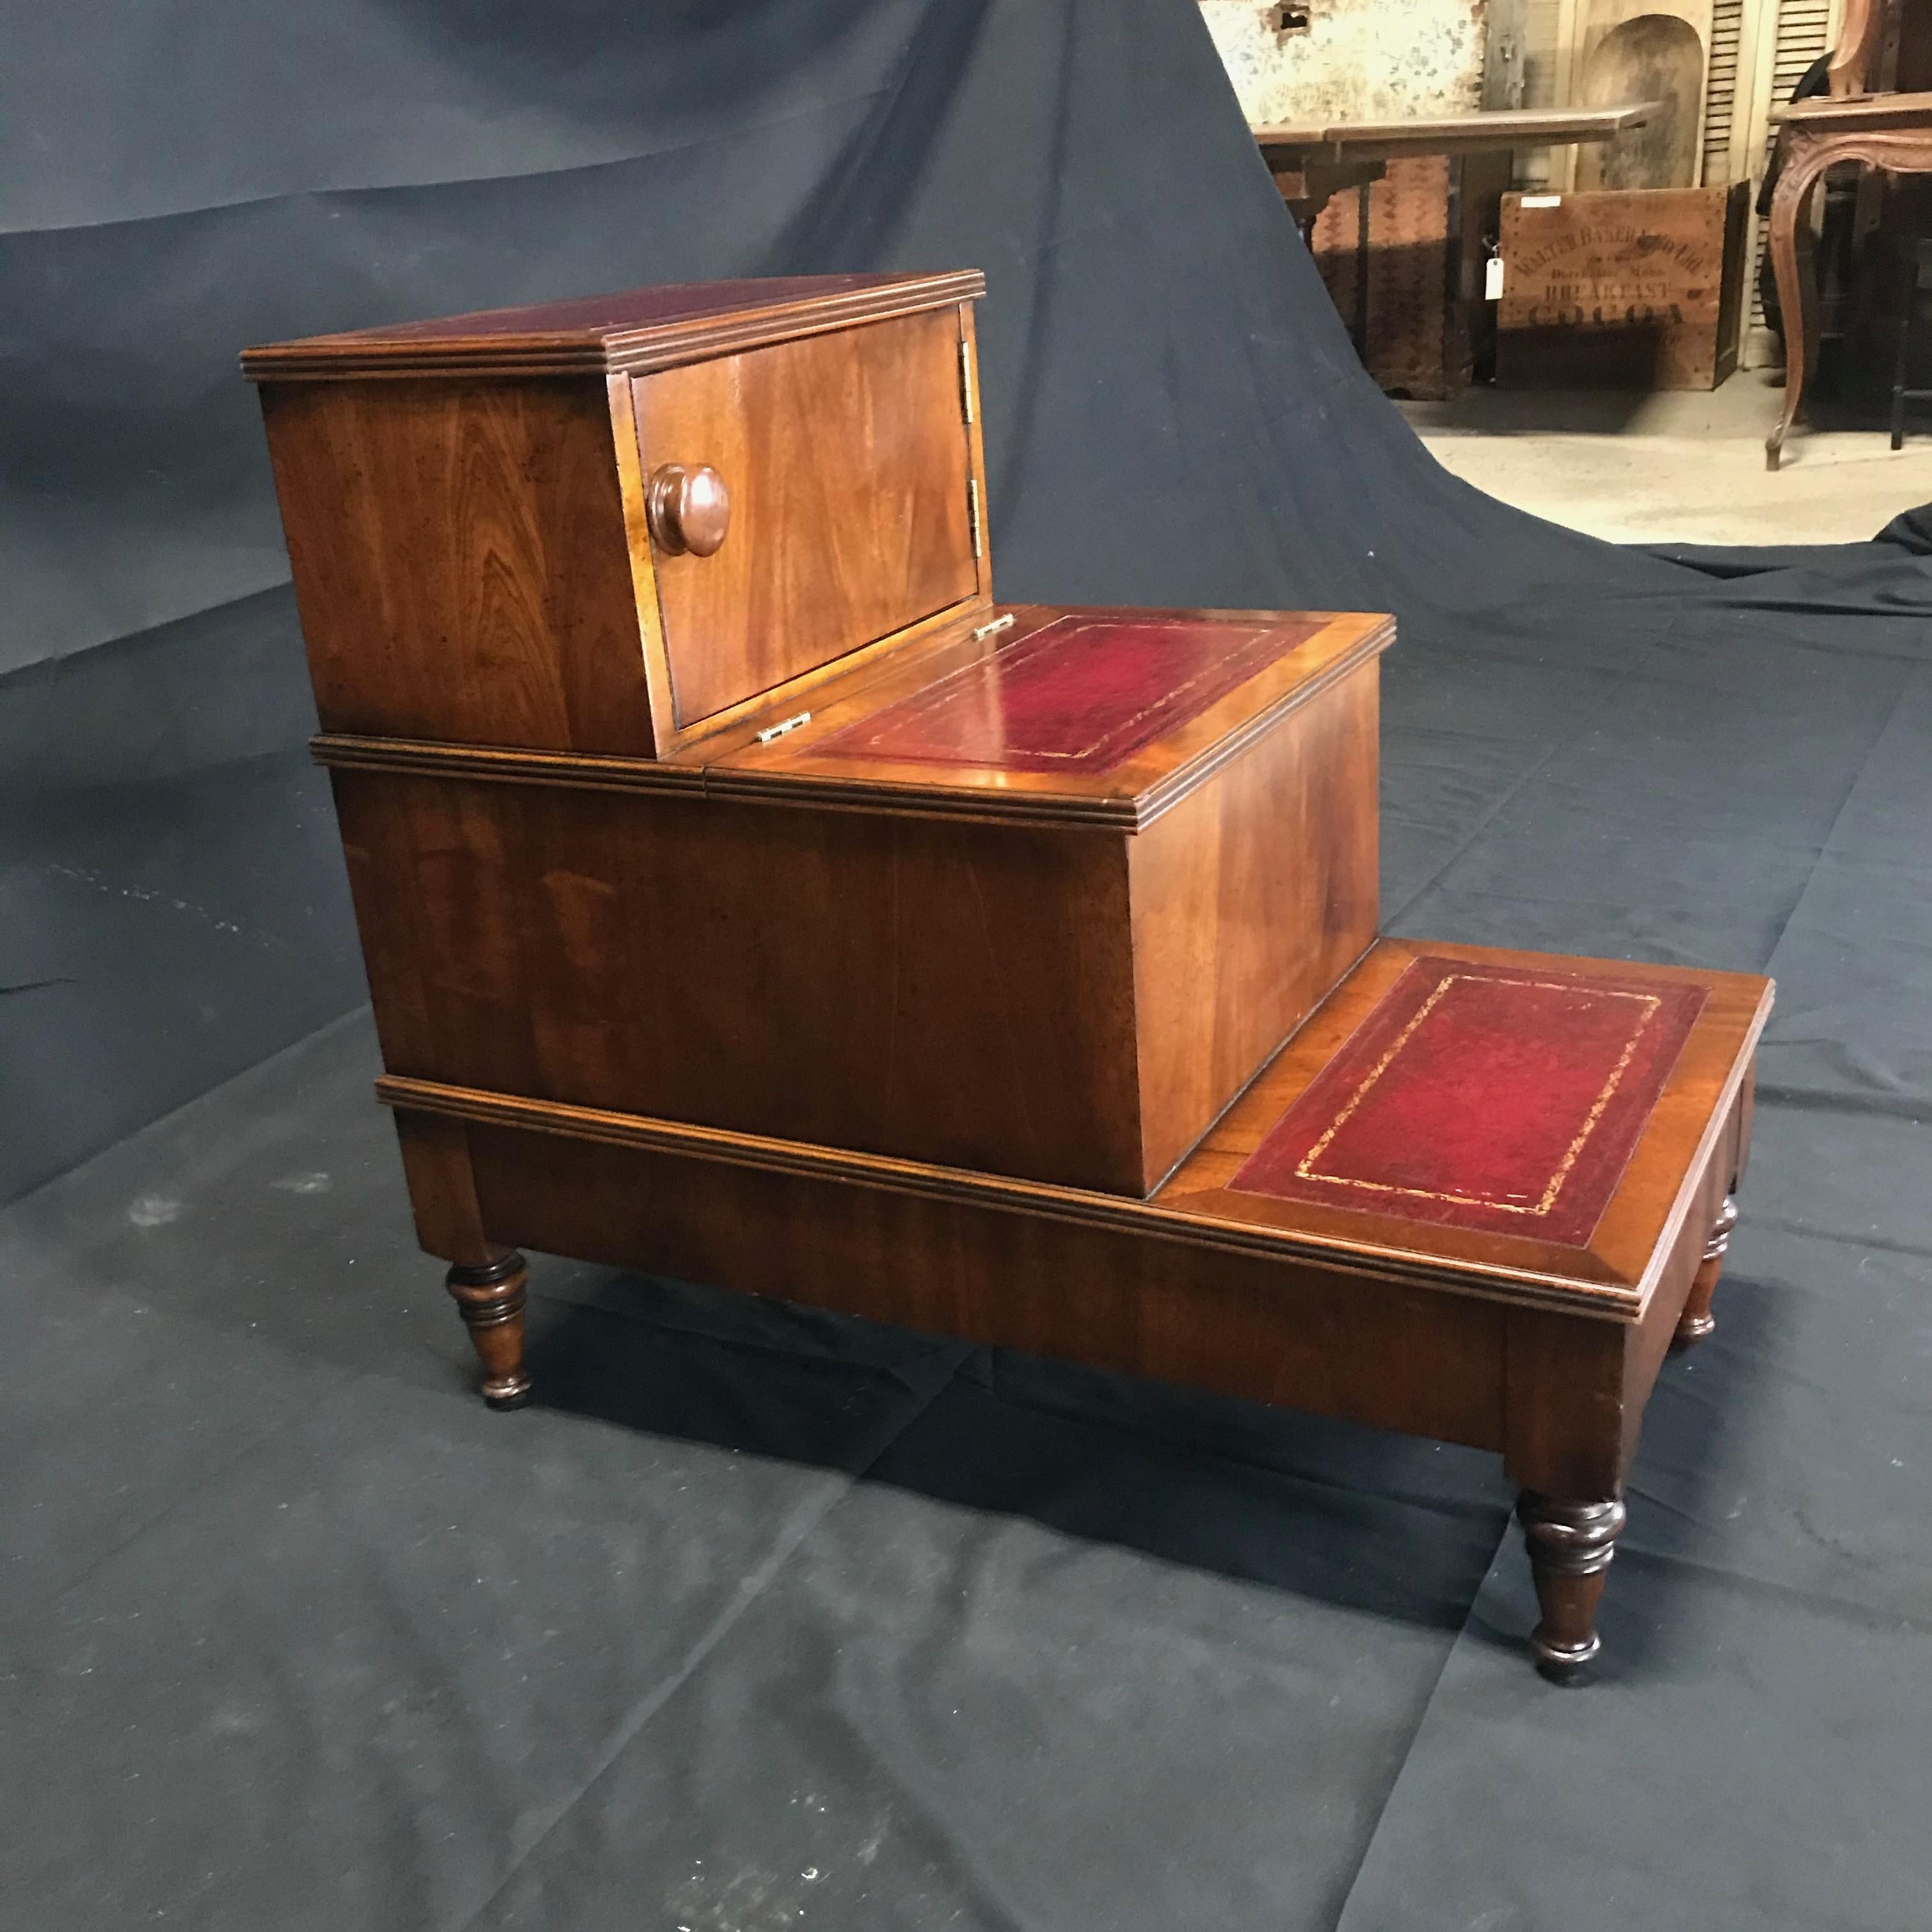 An unusually handsome set of mahogany library steps having a lovely burgundy tooled leather on the treads, ebonized inlaid design on front of steps and reeded detail on base and tops of steps. The piece includes a rare perk, having two storage